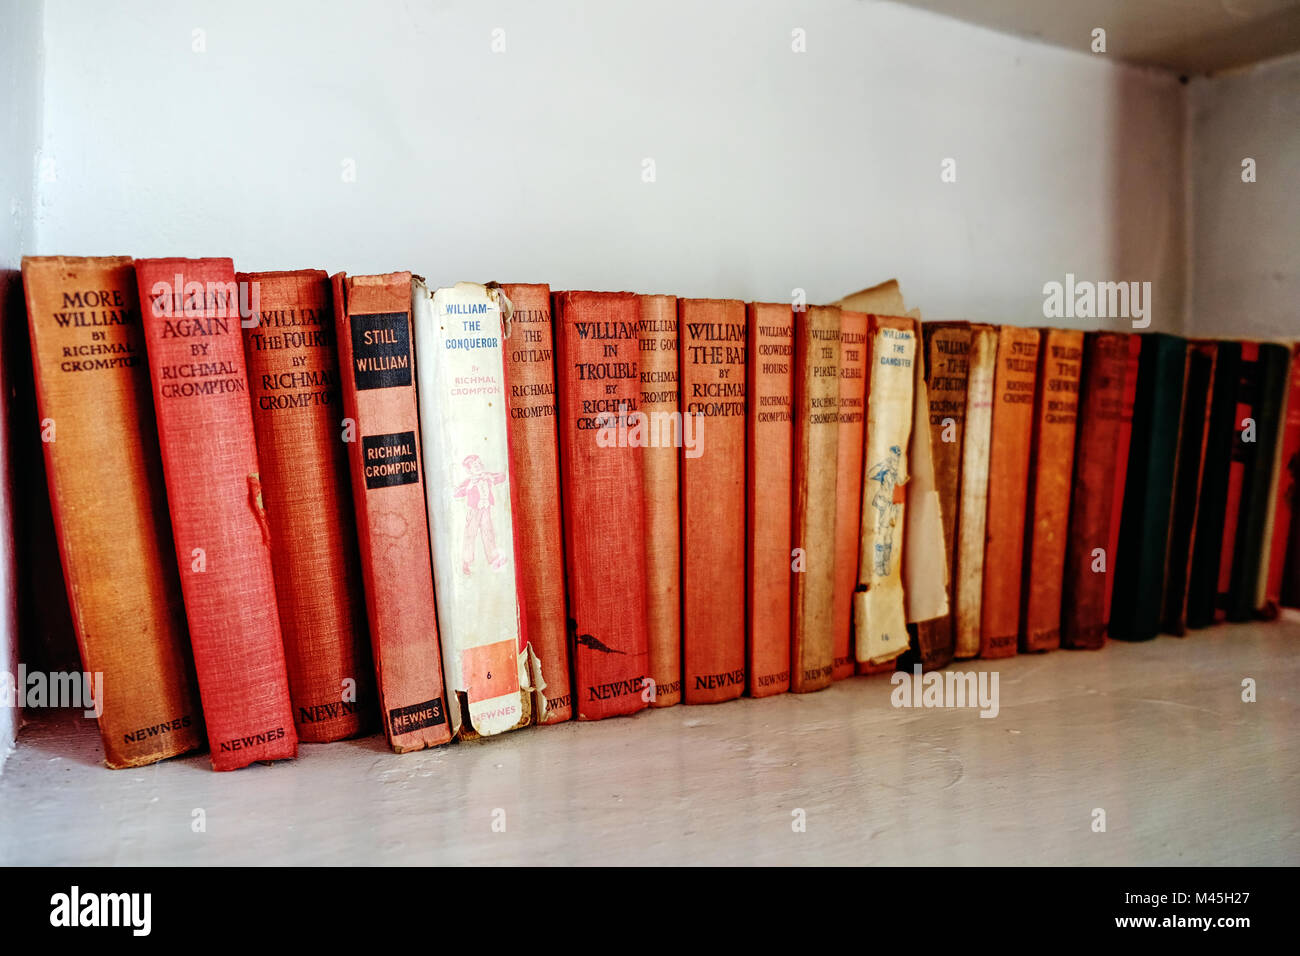 Collection of Just William books, by Richmal Crompton Stock Photo